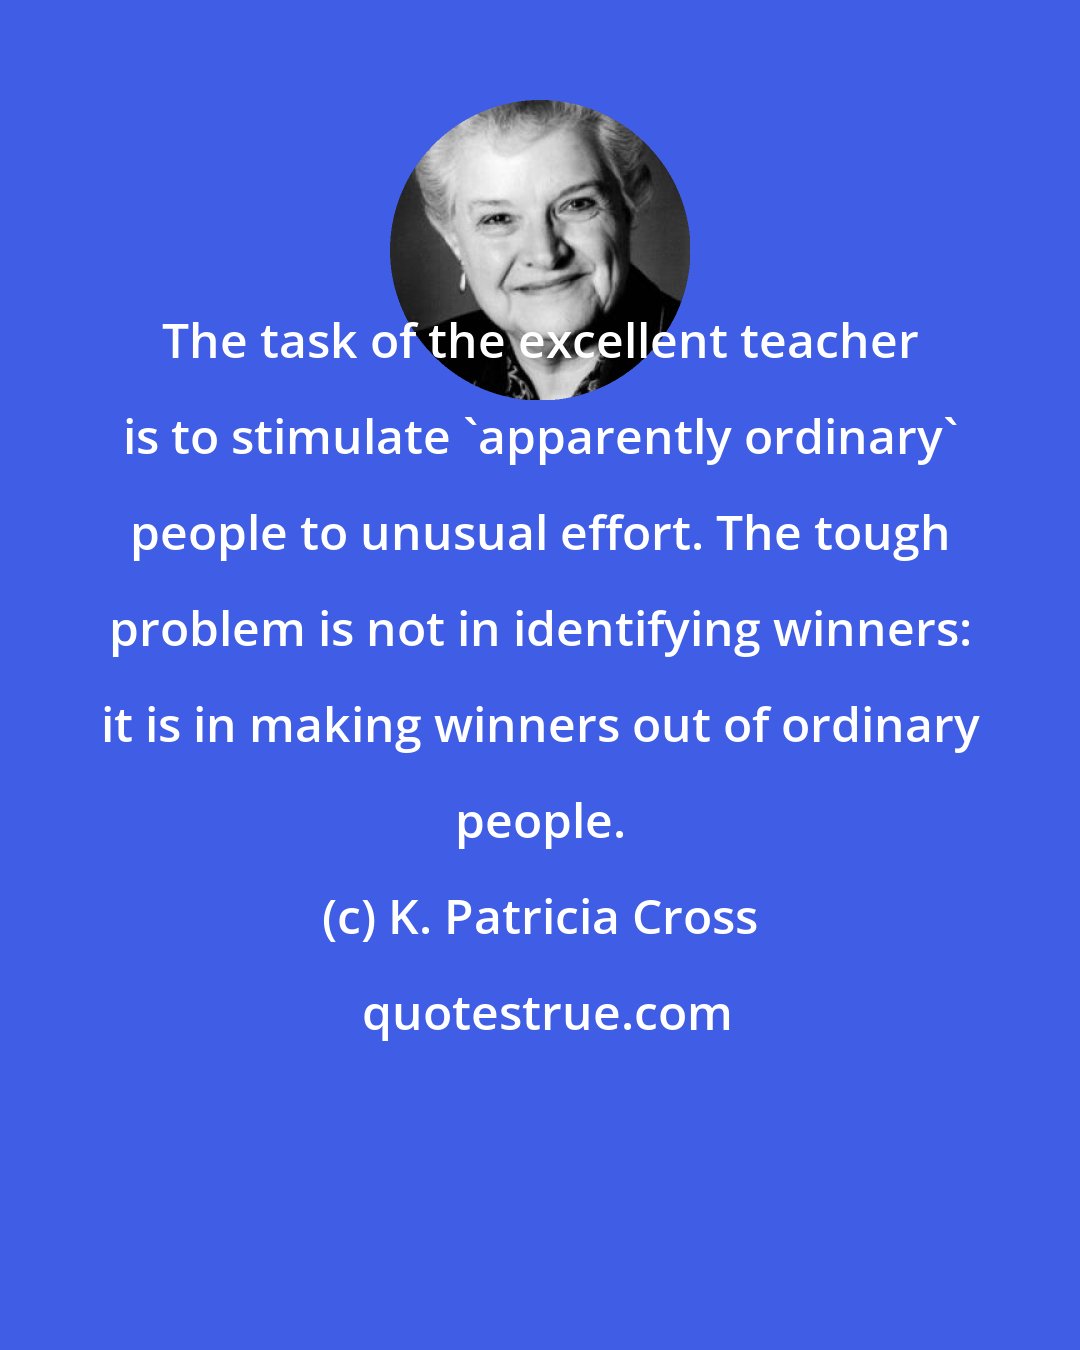 K. Patricia Cross: The task of the excellent teacher is to stimulate 'apparently ordinary' people to unusual effort. The tough problem is not in identifying winners: it is in making winners out of ordinary people.